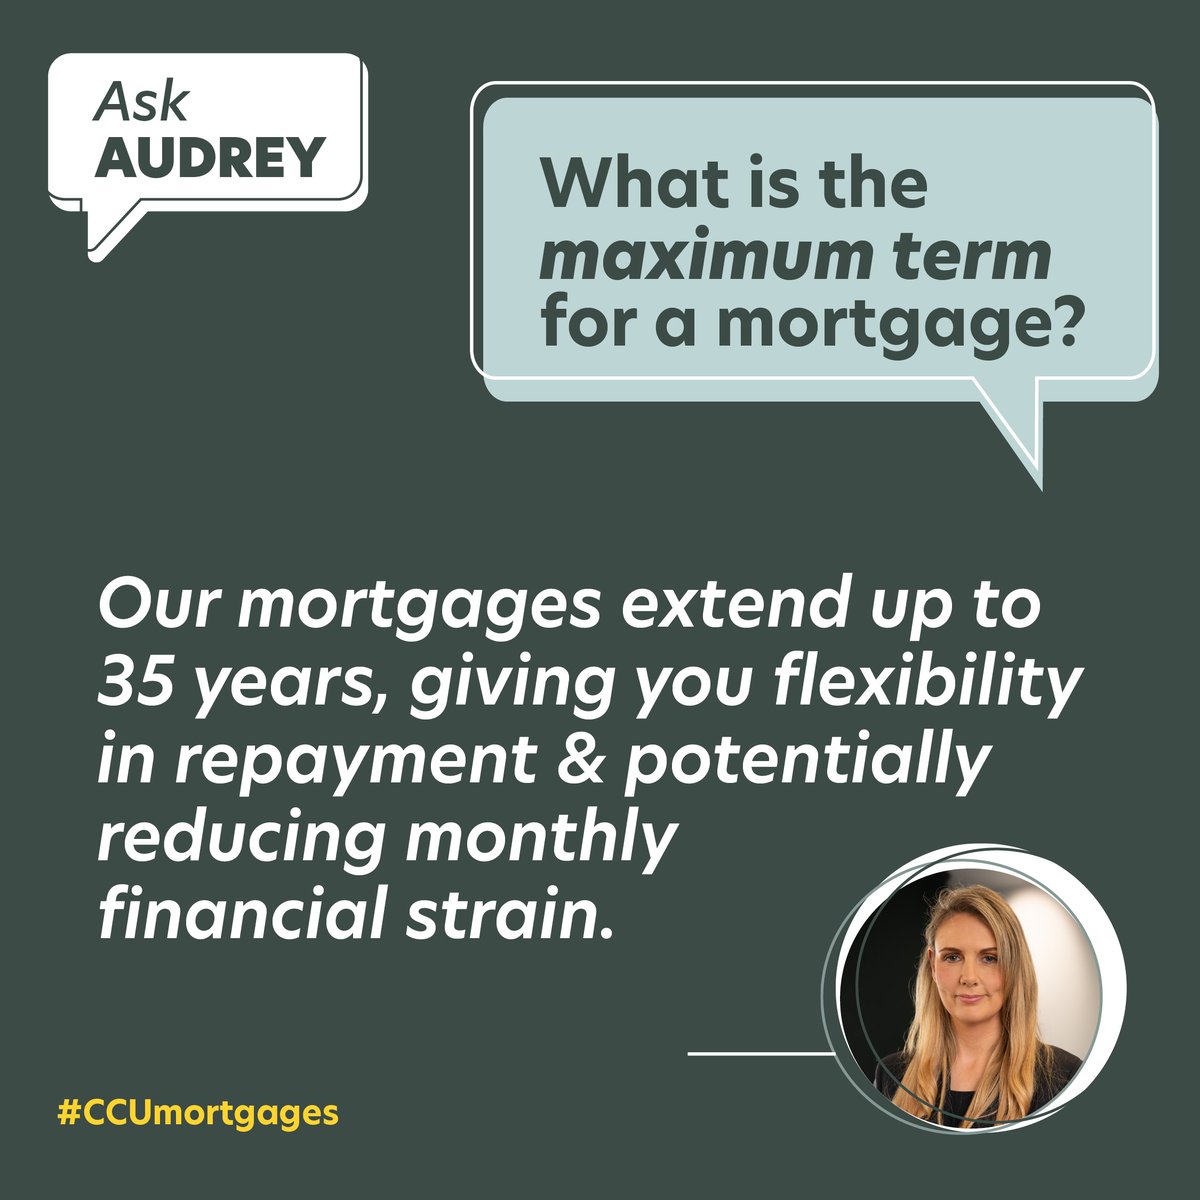 Our mortgages can stretch up to 35 years, offering you flexibility and easier monthly payments. Let’s make your dream home affordable.
#AskAudrey #MortgageTips #CCUmortgages #FinanceTips  #Homebuyersguide #homeloansmadesimple #mortgagehelp